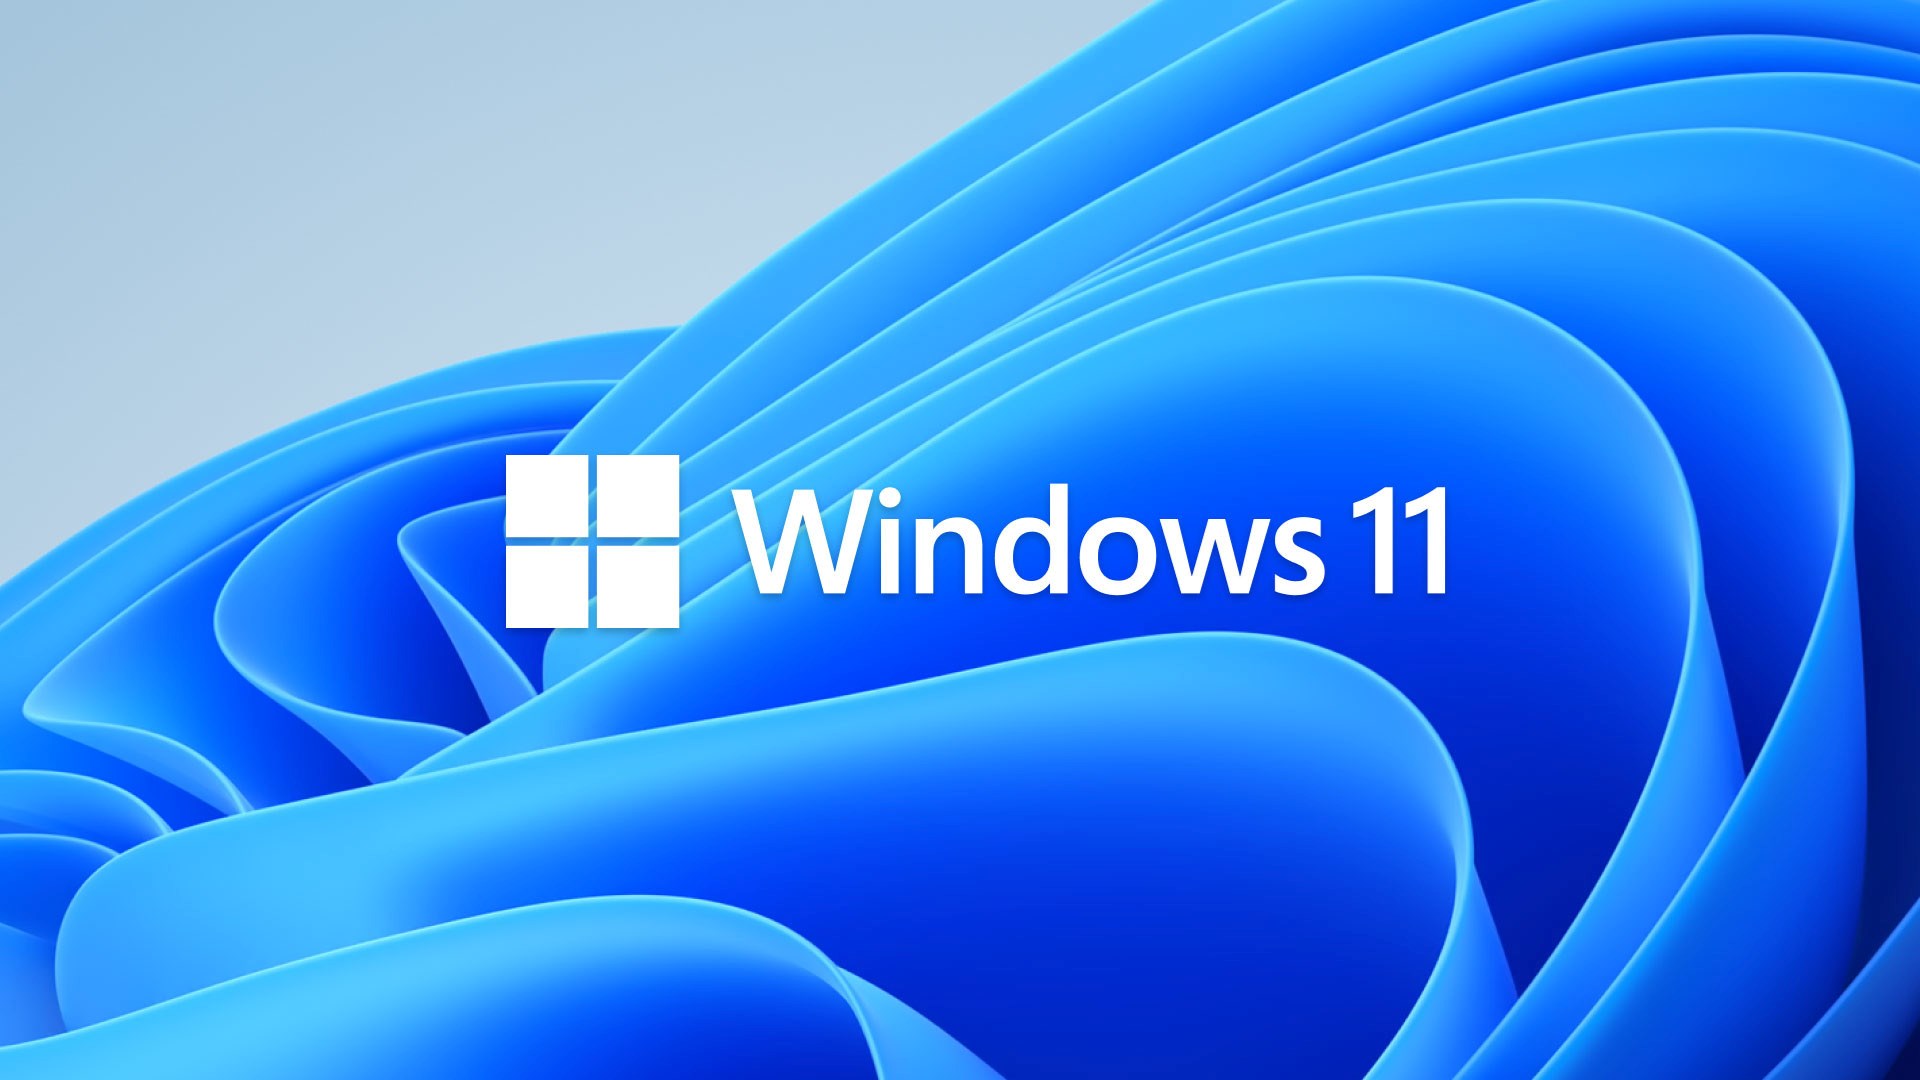 Technology: An unprecedented update is coming to Windows in early 2024